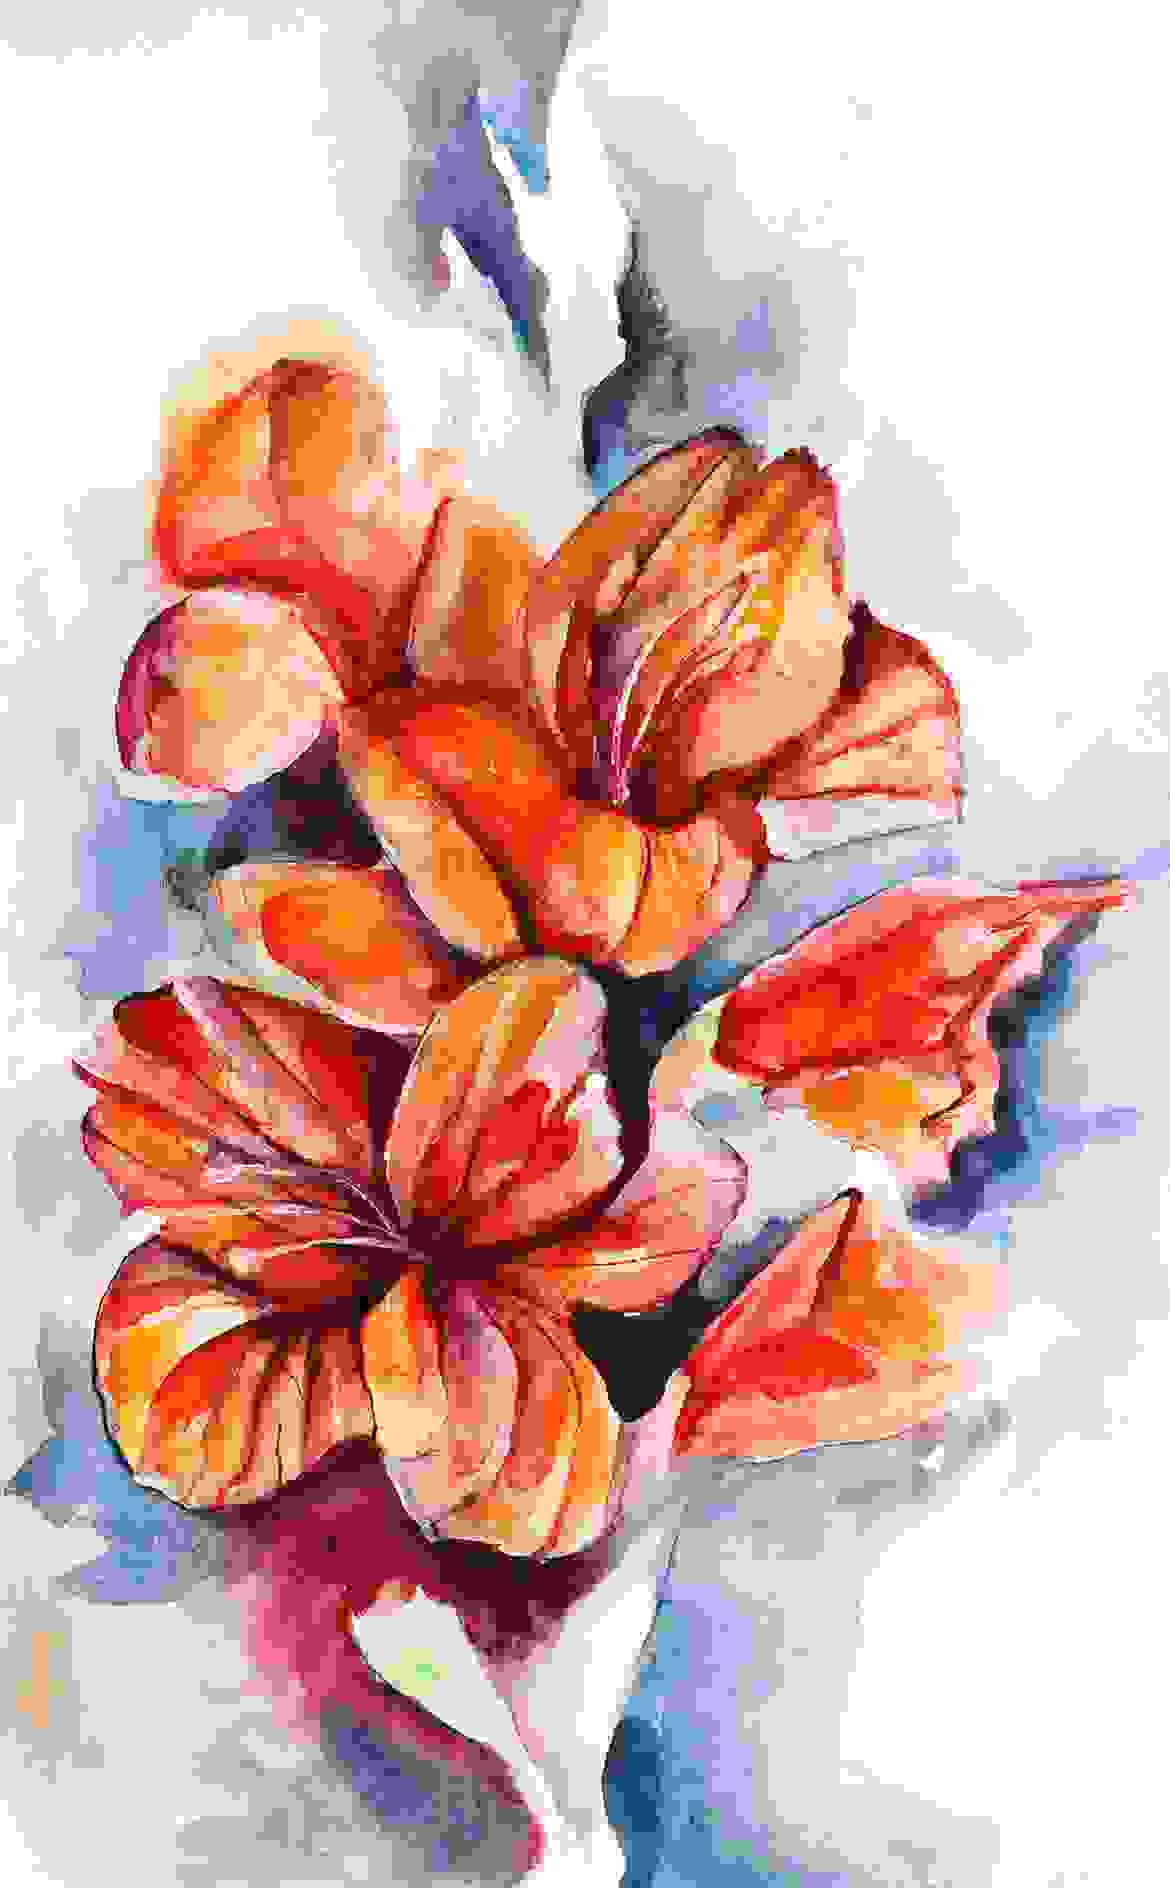 Impressionist’s painting of flowers